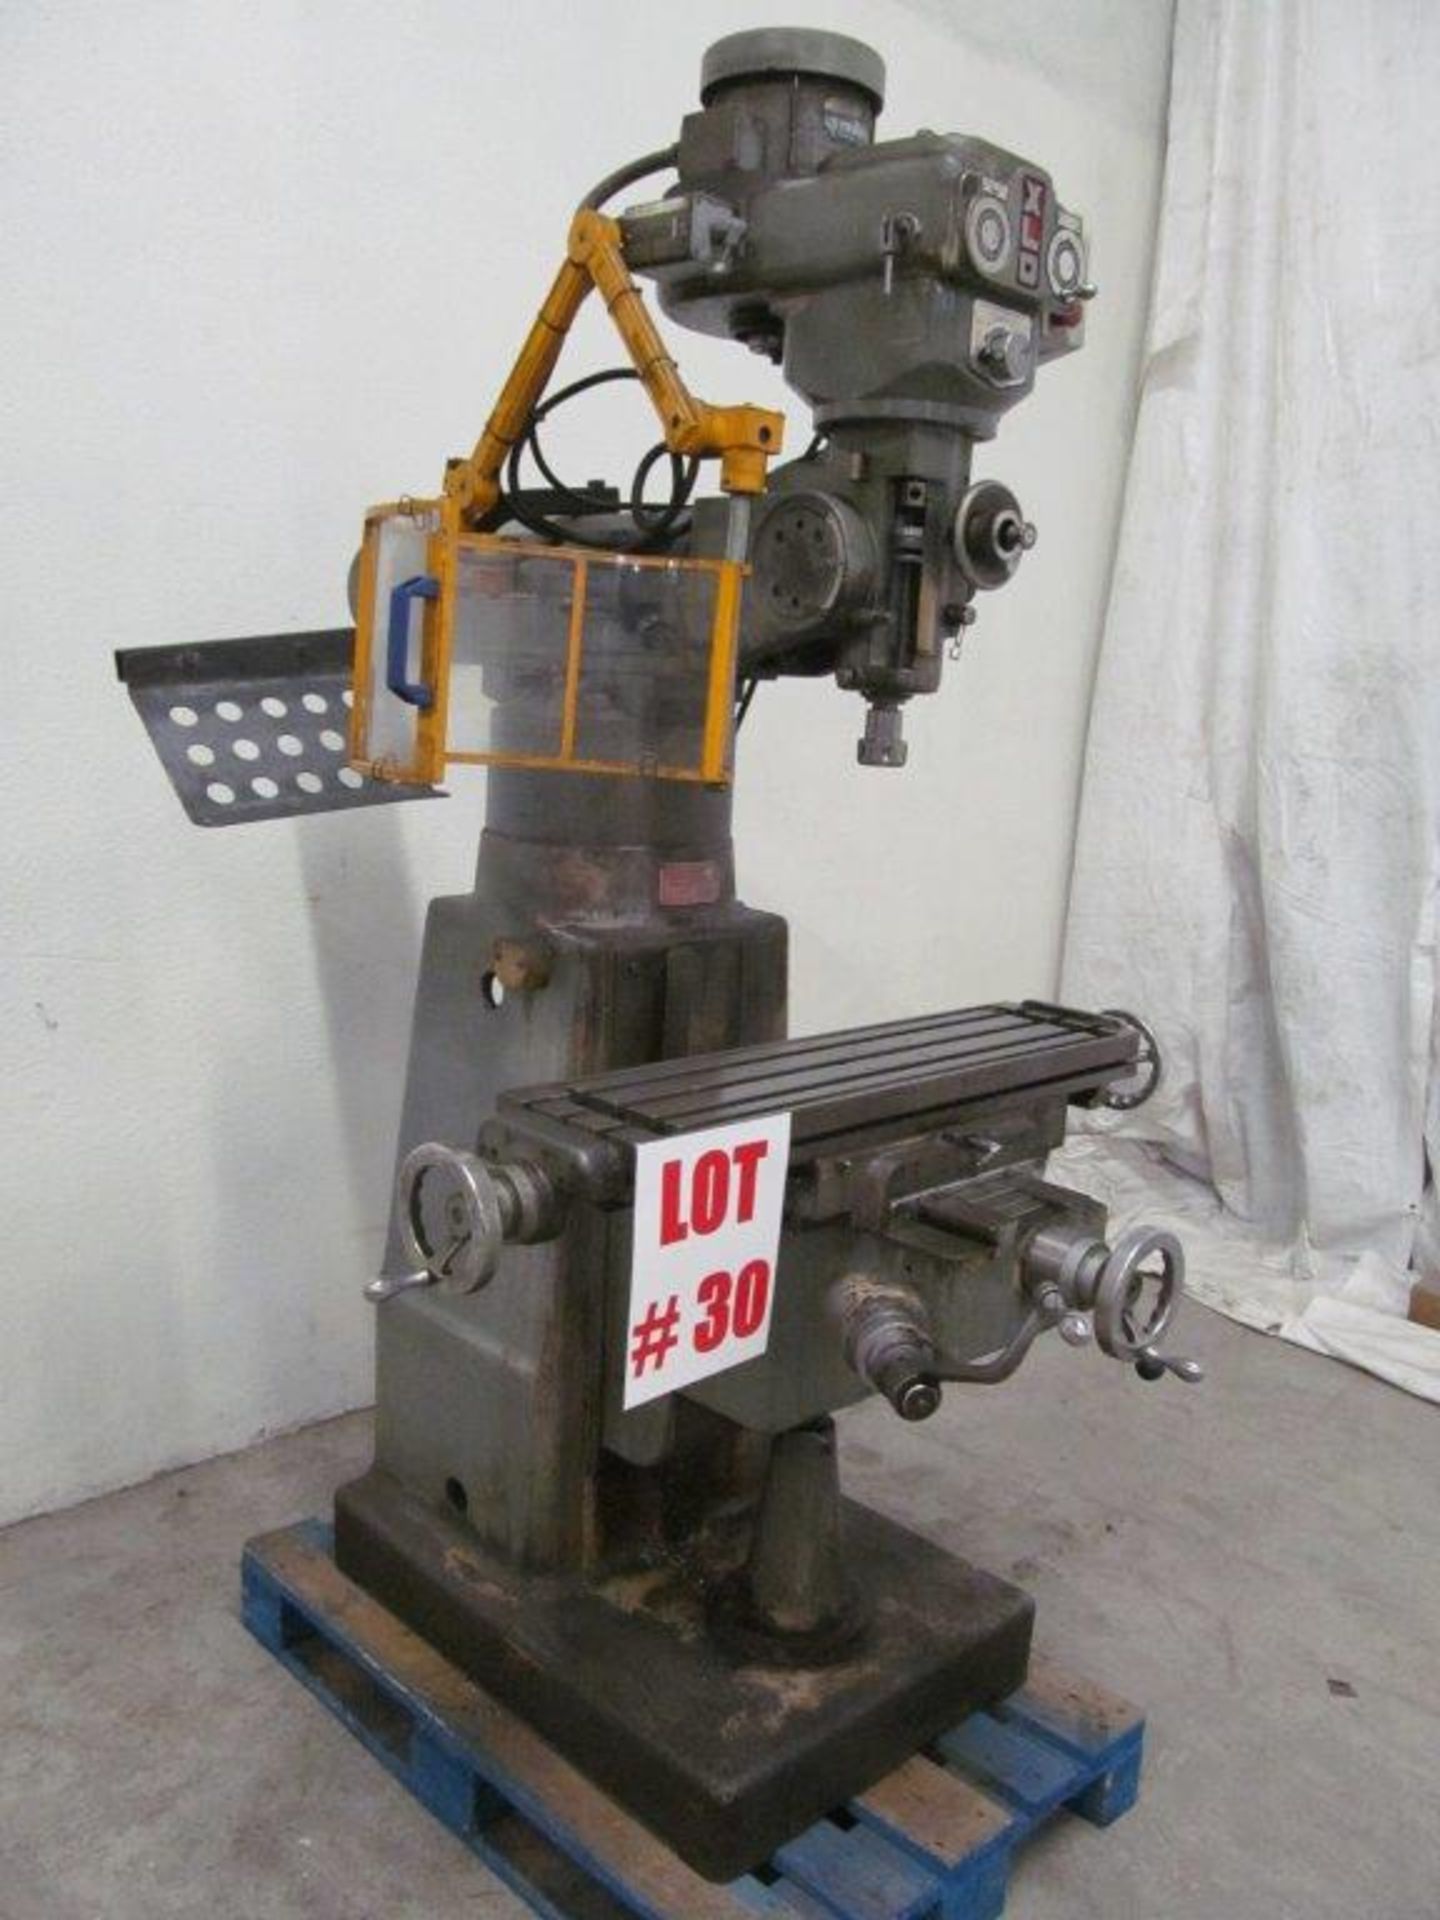 EX-CELL-O TURRET MILLING MACHINE, VARIABLE SPEED , MODEL 602 - LOCATION, HAWKESBURY, ONTARIO